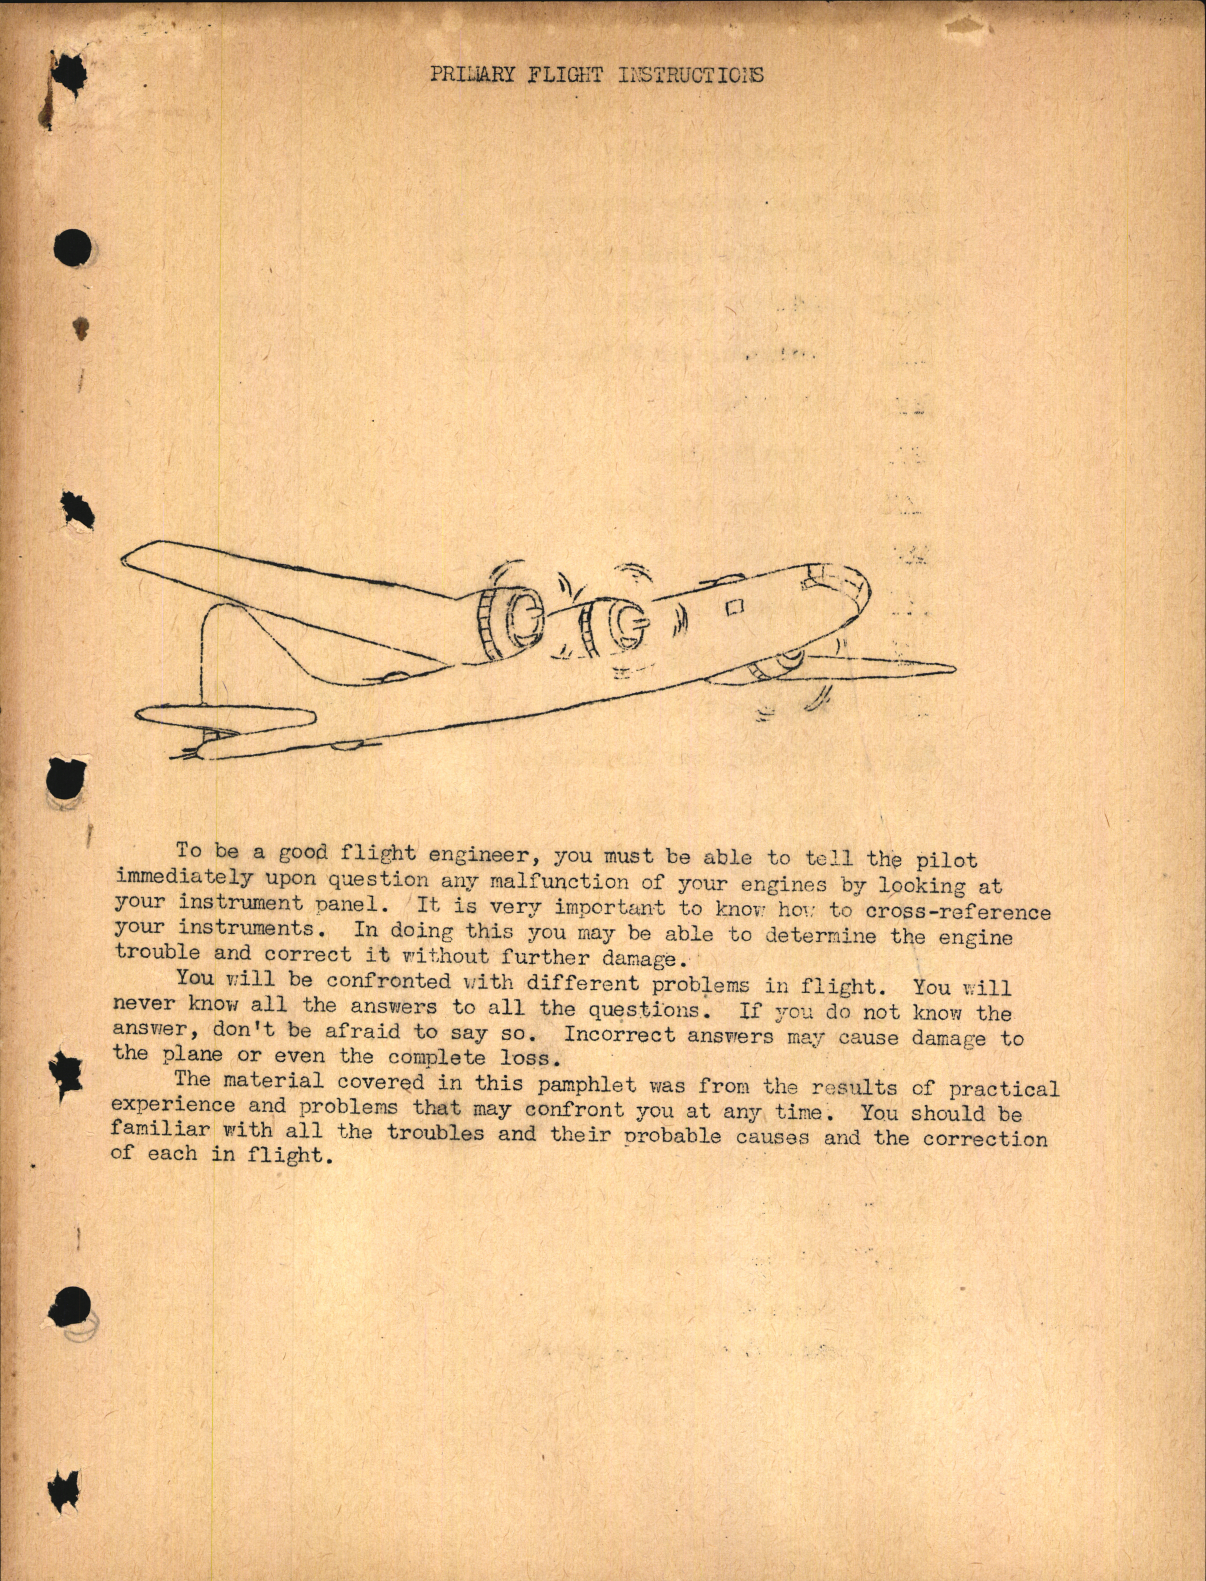 Sample page 1 from AirCorps Library document: Primary Flight Instructions for B-24, C-87, and B-17, Flight Engineer Division